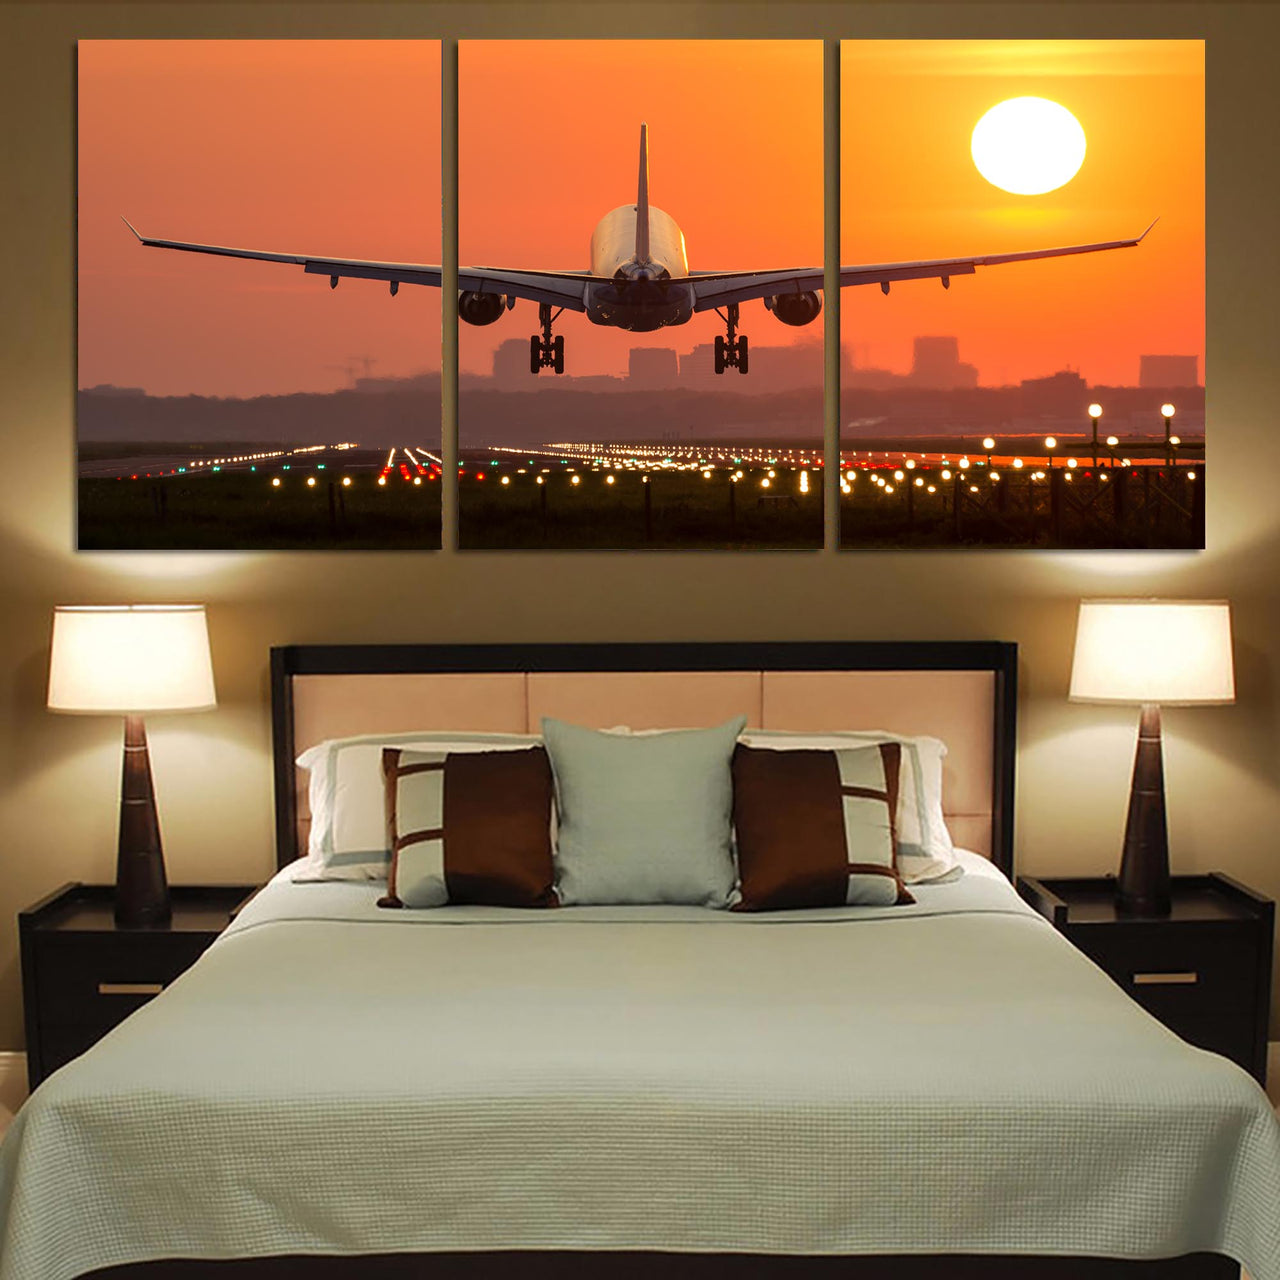 Amazing Airbus A330 Landing at Sunset Printed Canvas Posters (3 Pieces)